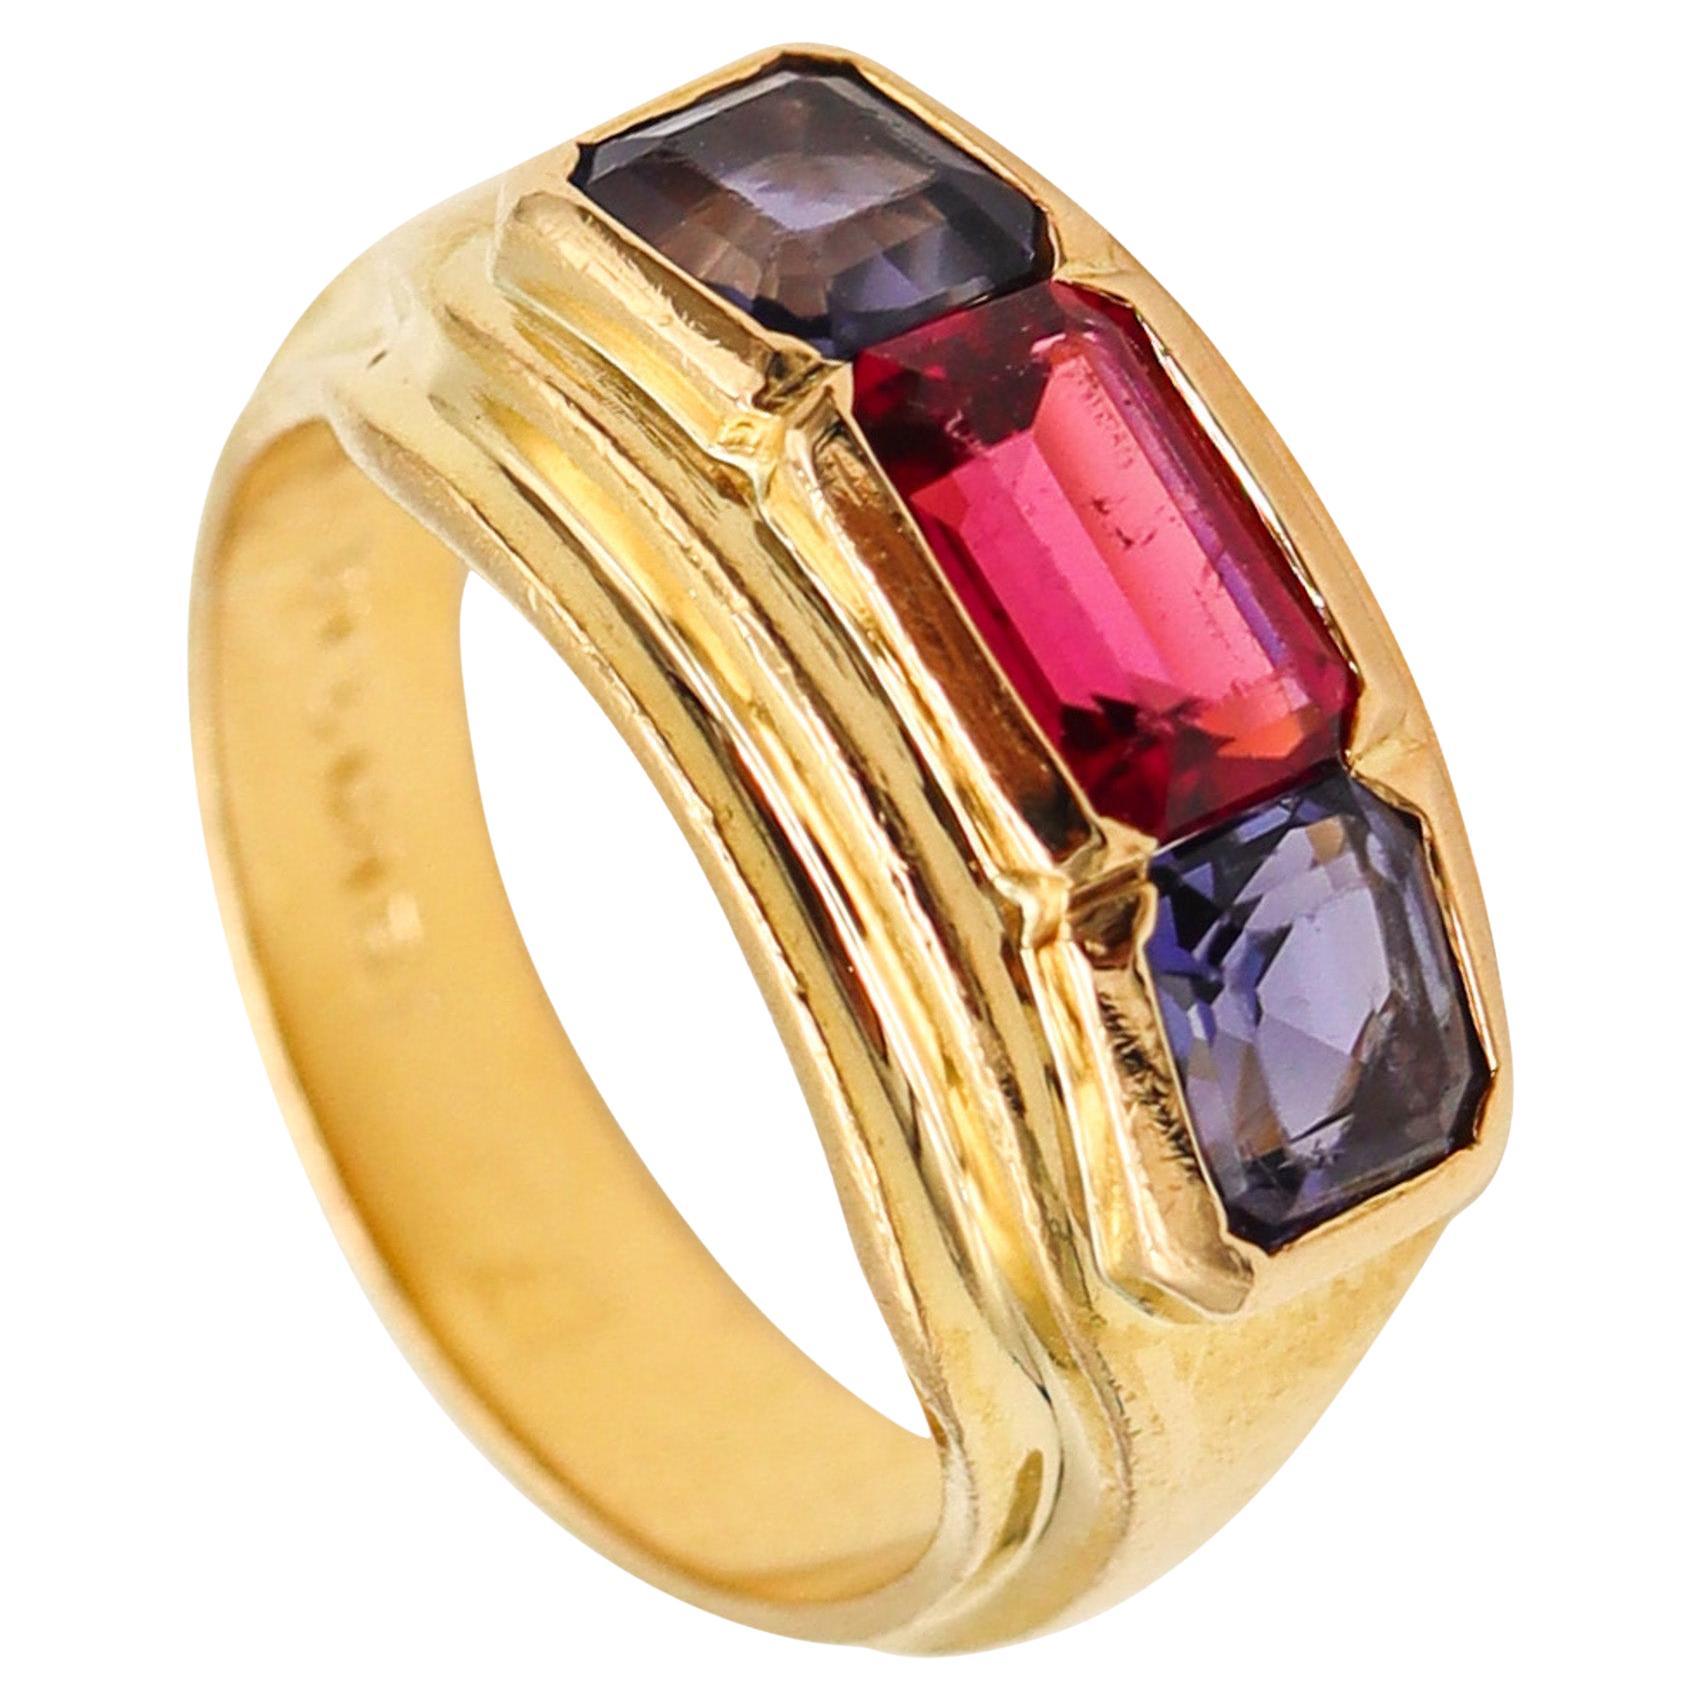 Bvlgari France Three Gems Ring In 18Kt Gold With 2.18 Ctw In Tourmaline & Iolite